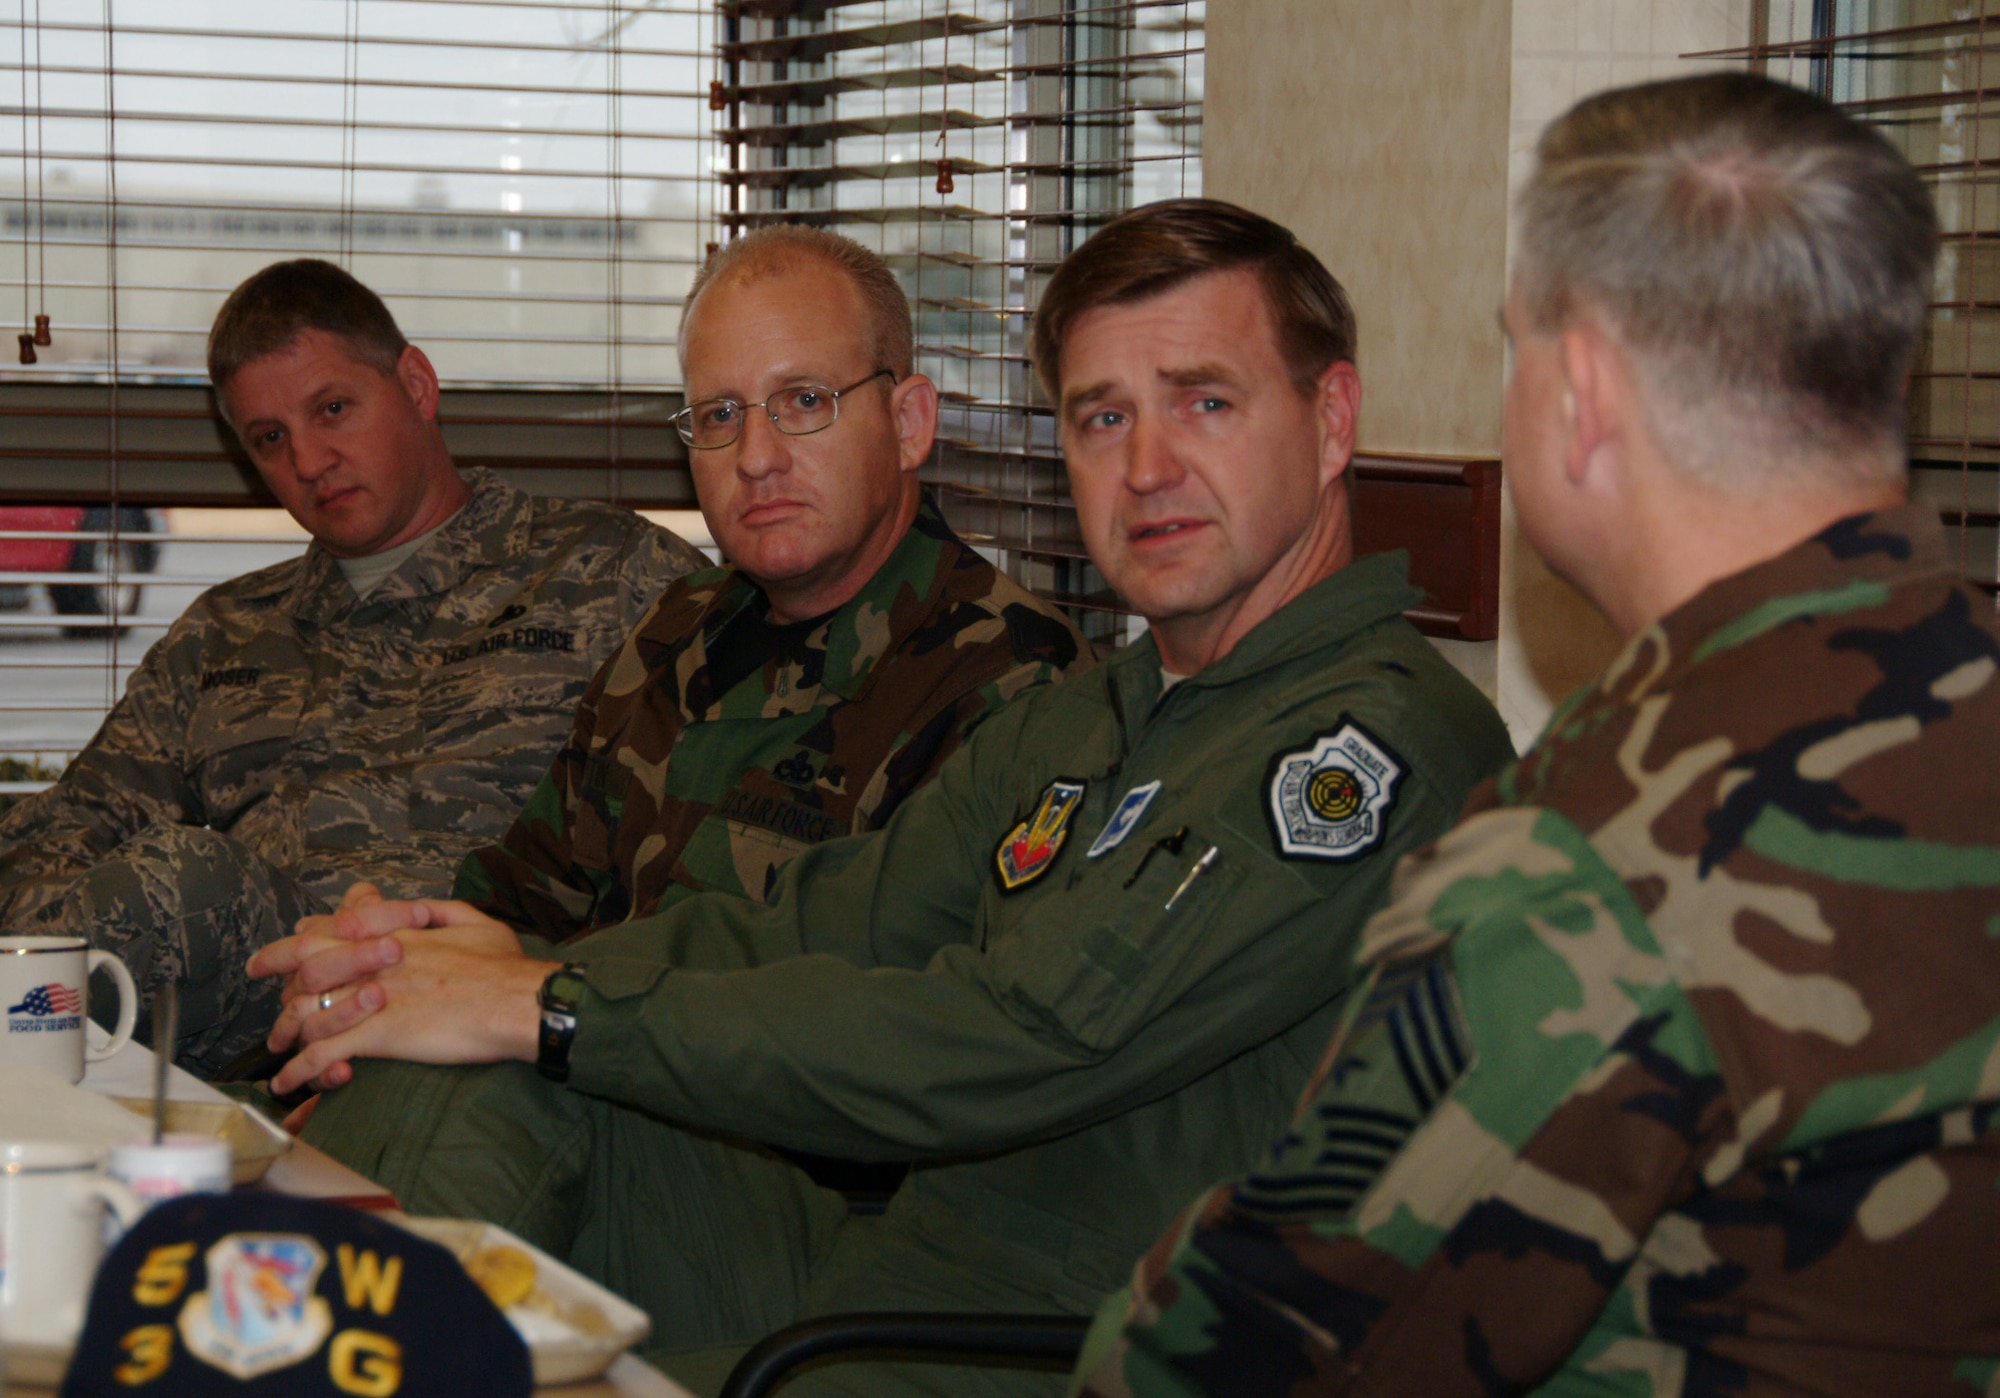 Brig. Gen. Stephen Hoog, United States Air Force Warfare Center commander, talks with Chief Master Sgt. Randy Salesfke (right), 53d Wing command chief, during the general’s breakfast with enlisted members Feb. 21 at “The Breeze” dining facility at Eglin Air Force Base.  Chief Master Sgts Neal Moser (left), 53d Electronic Warfare Group, and Douglas Martin (middle), 53d Weapons Evaluation Group, listen in.  The general spoke about budgetary issues, deployment, the new Air Force slogan and the future of electronic warfare.  U.S. Air Force photo by Staff Sgt. Samuel King Jr.